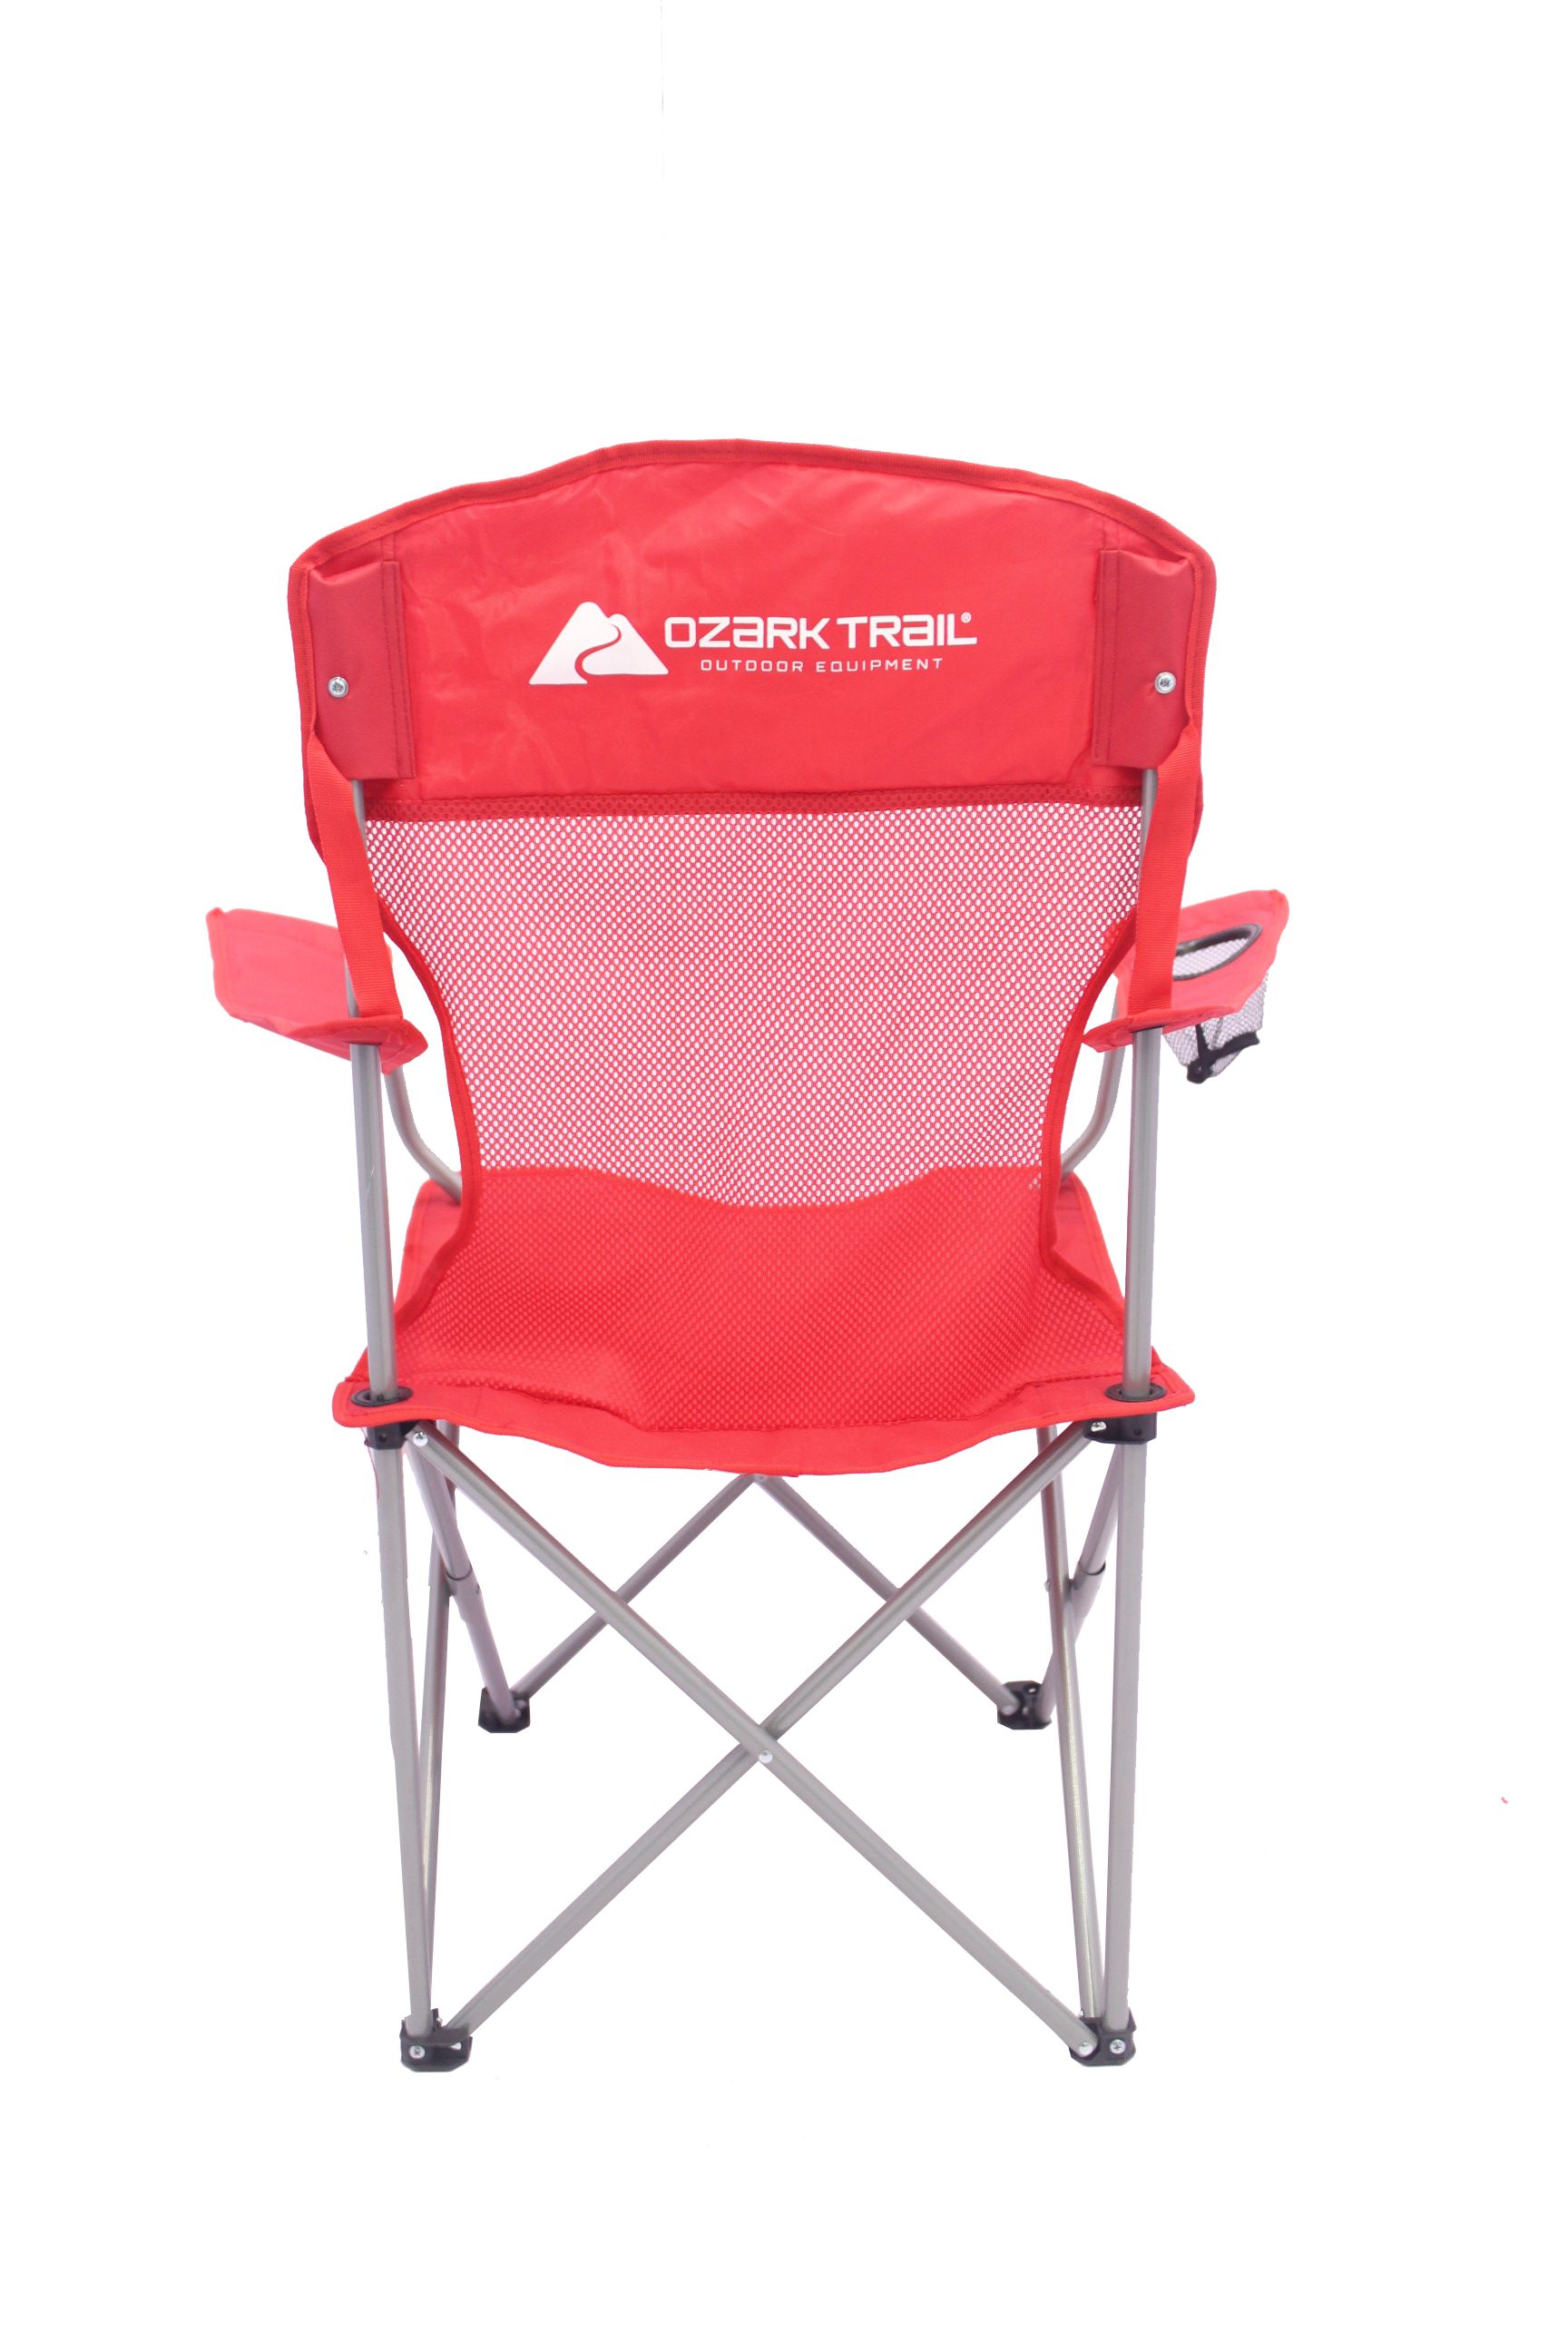 Ozark Trail Basic Mesh Chair, Red, Adult - image 4 of 10